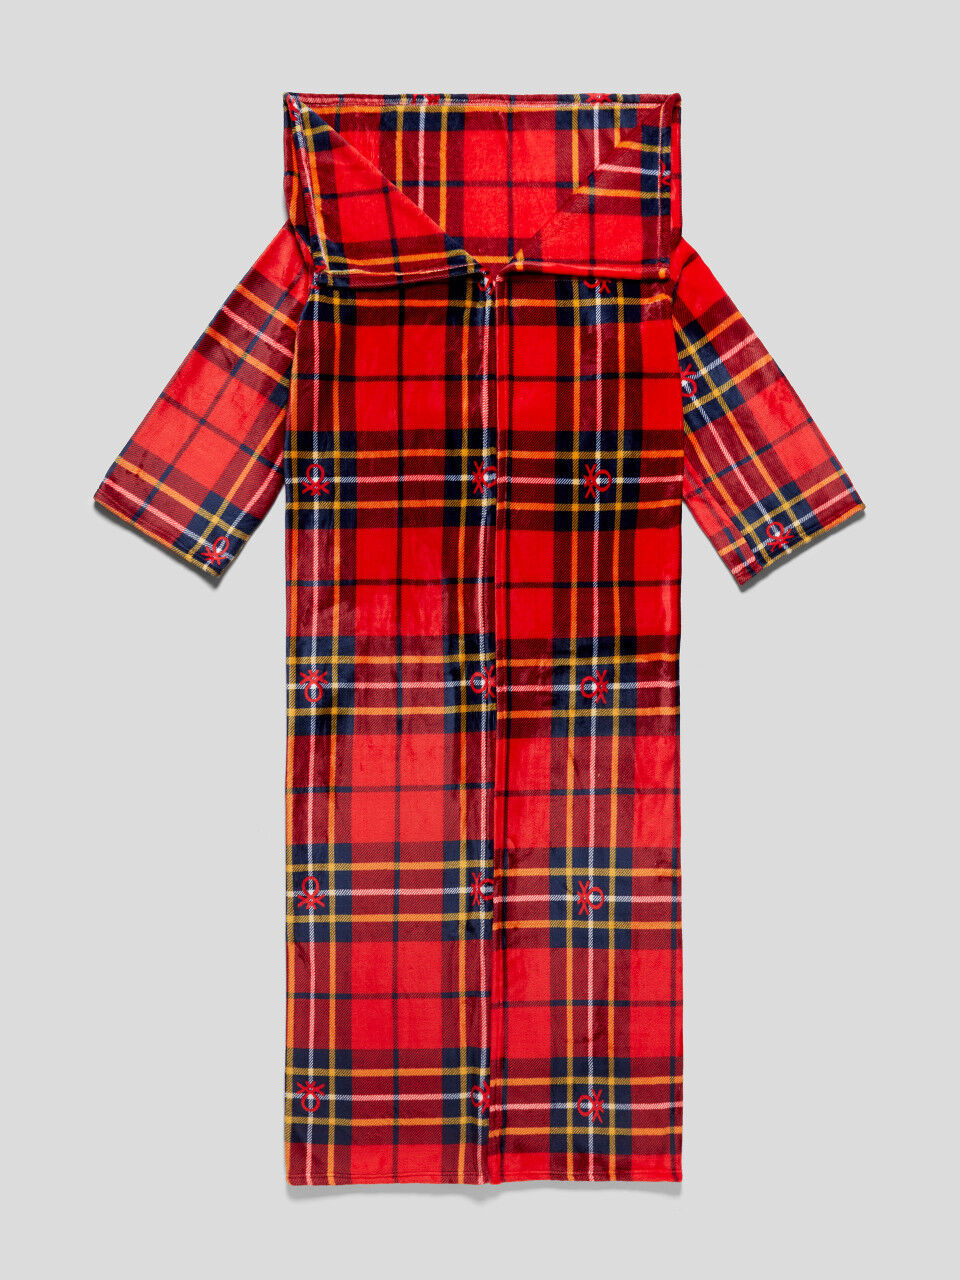 Tartan cover with sleeves